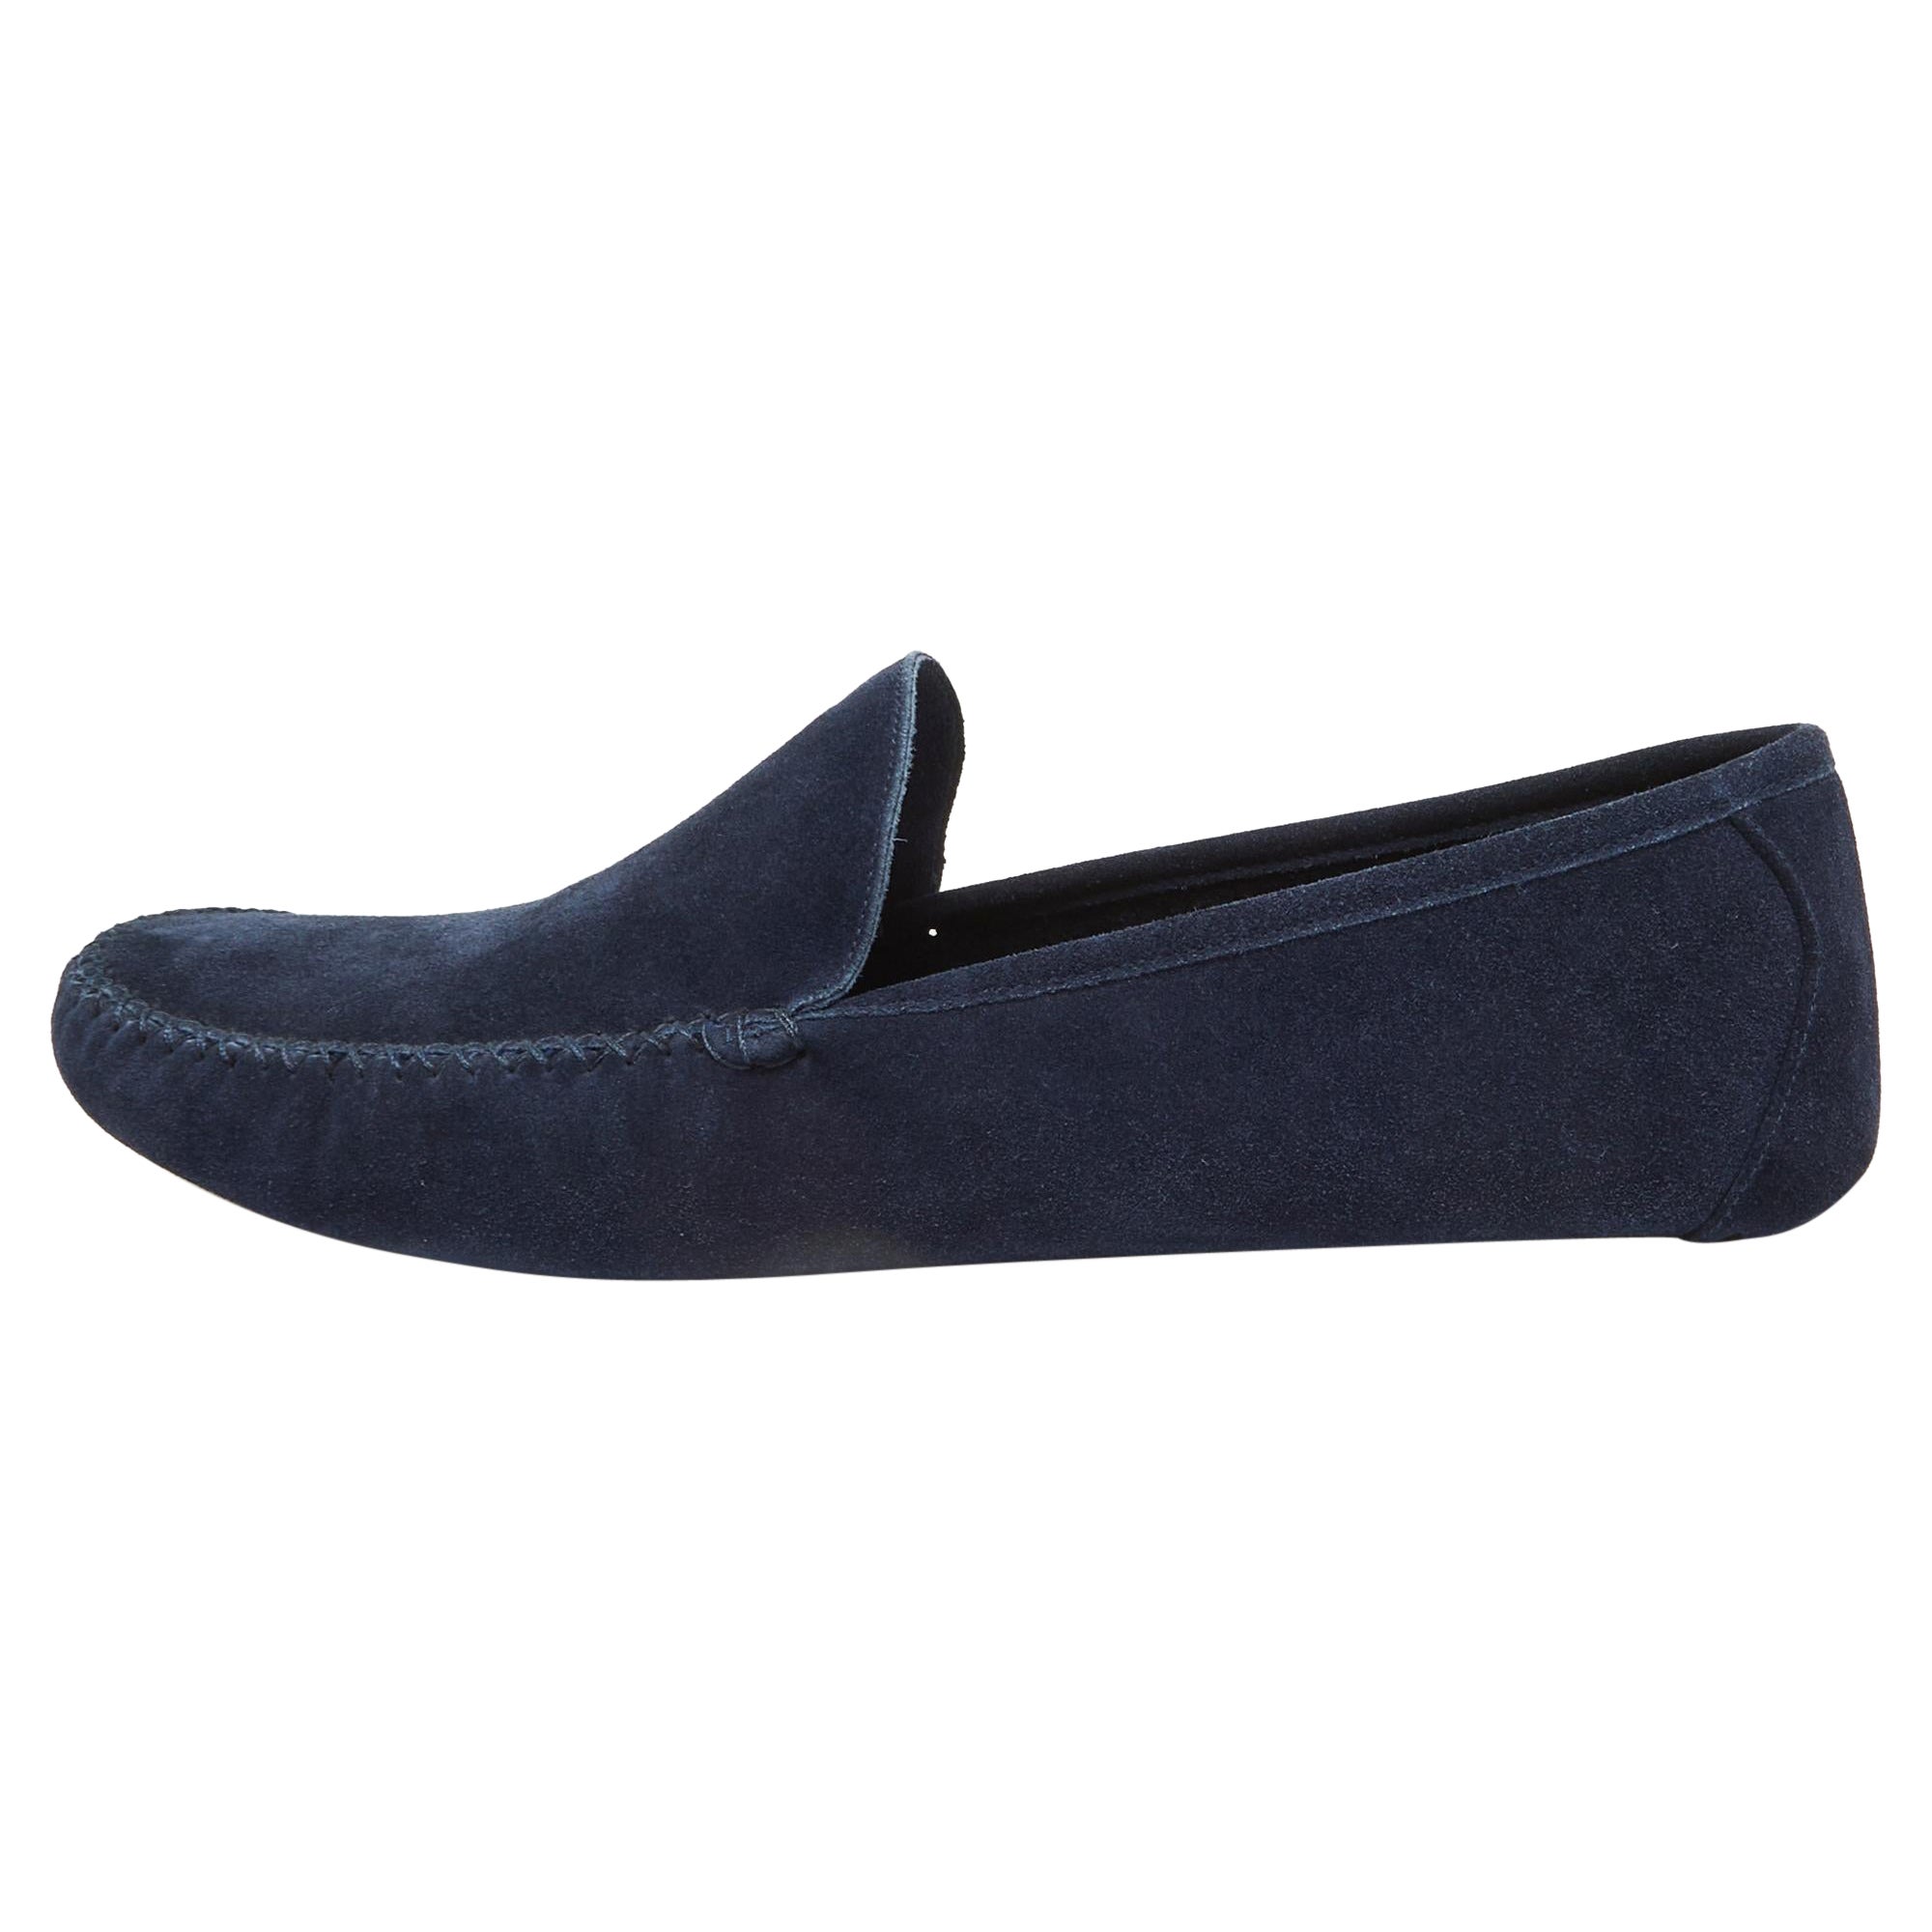 Loro Piana Blue Suede Slip On Loafers Size 45